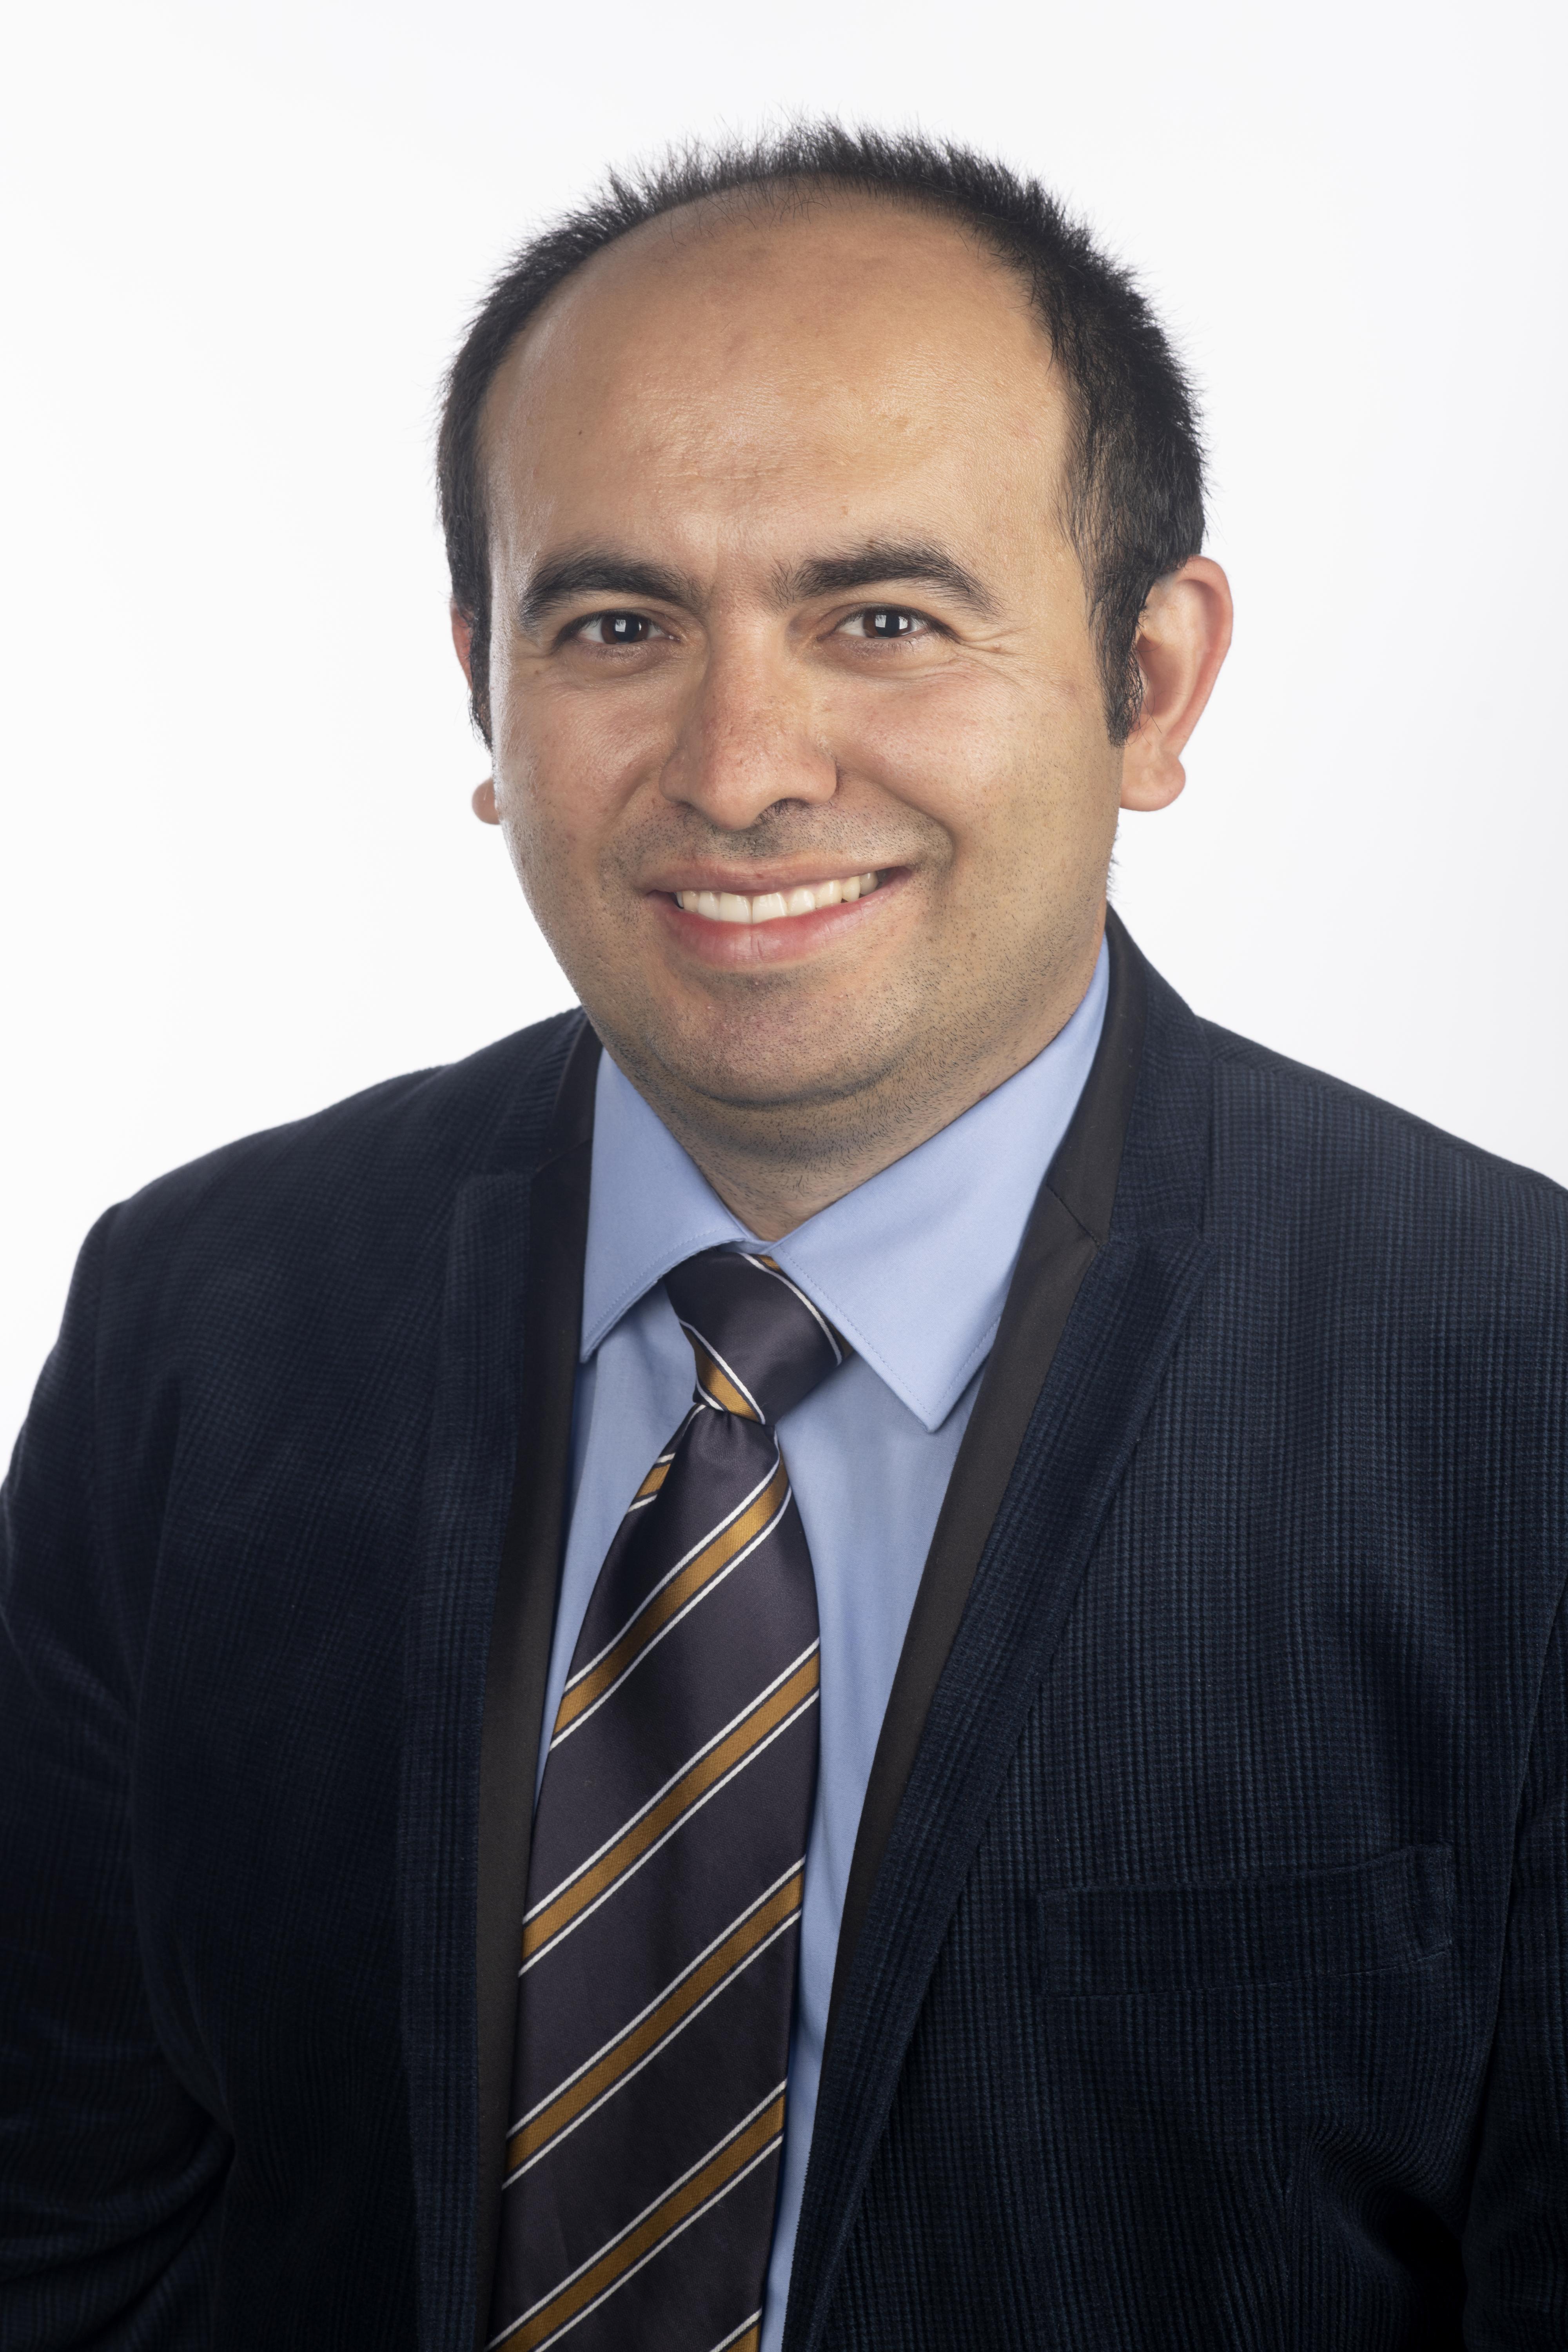 Ahmet F. Coskun, a Bernie Marcus Early Career professor in the Coulter Department of Biomedical Engineering